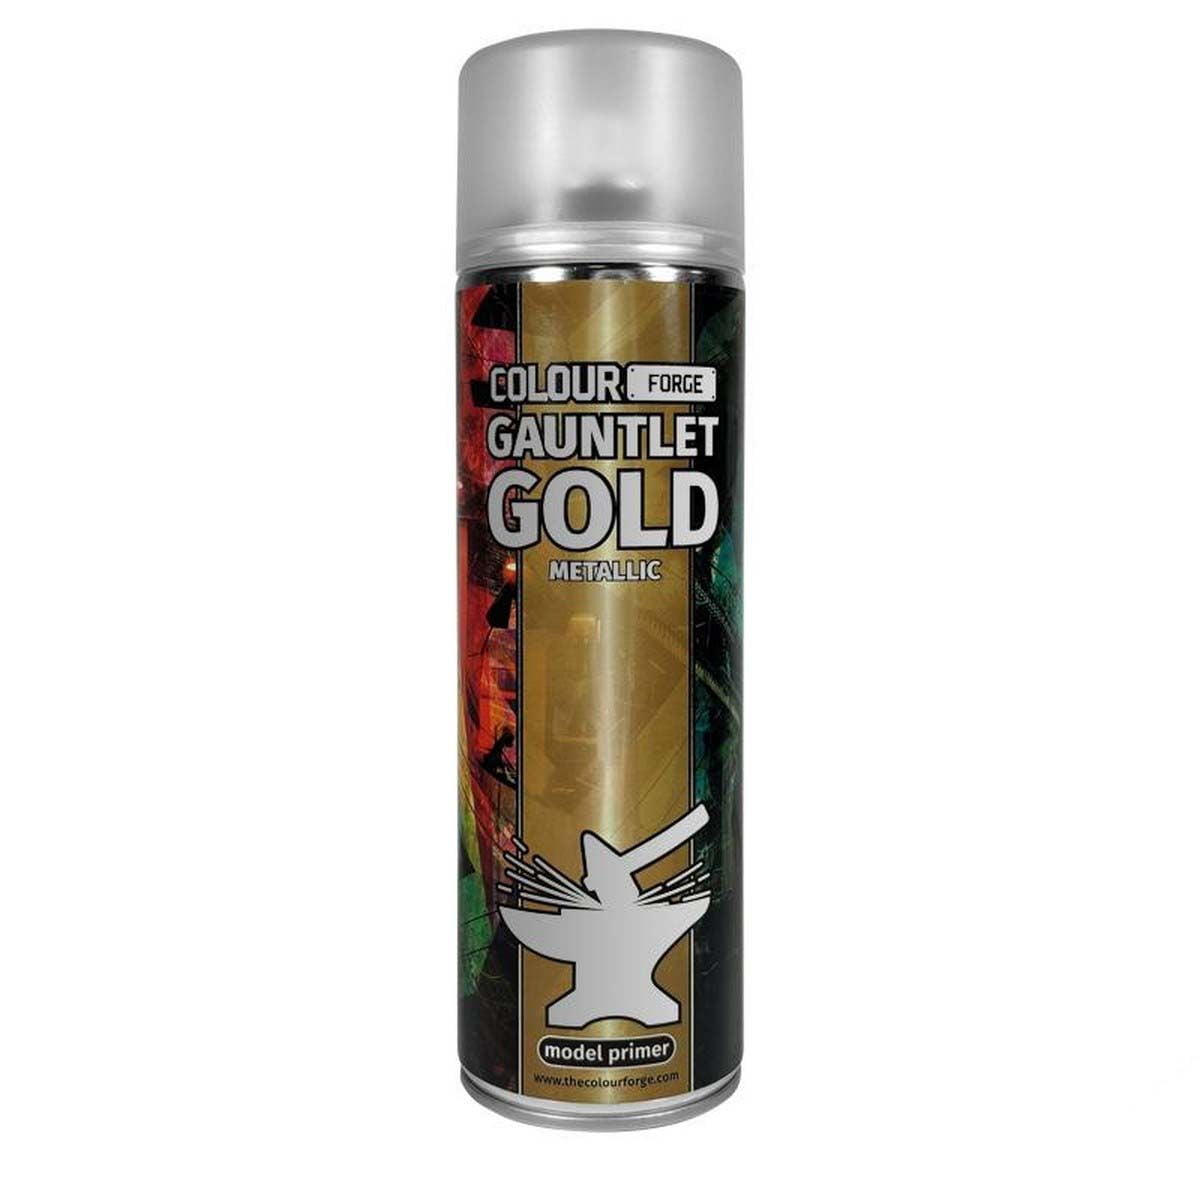 Colour Forge Gauntlet Gold Spray